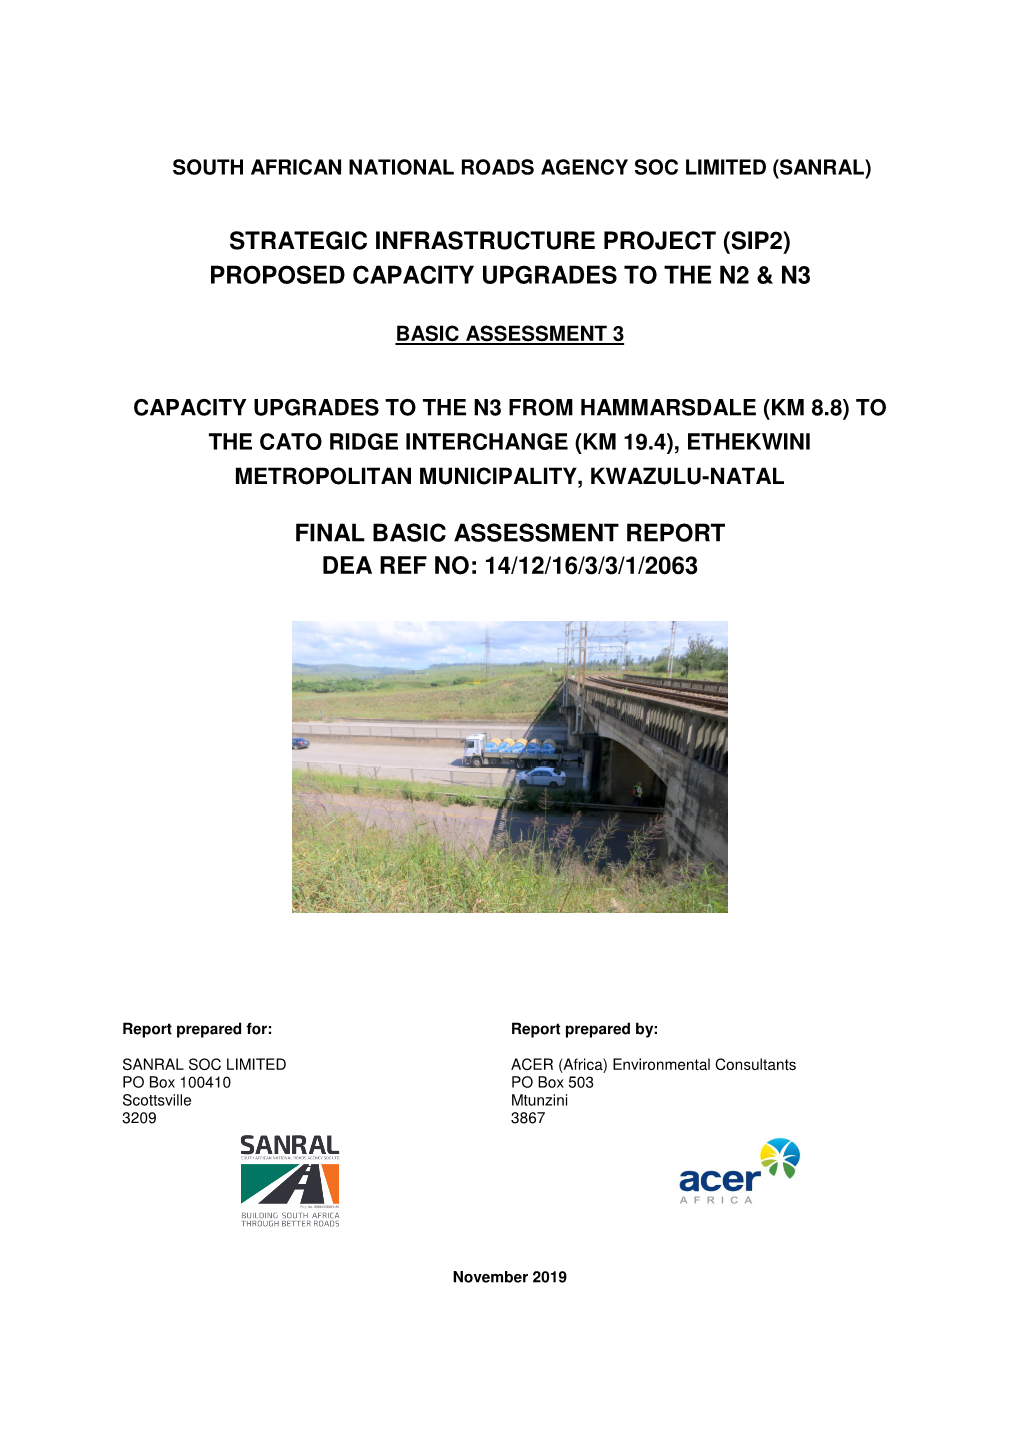 Strategic Infrastructure Project (Sip2) Proposed Capacity Upgrades to the N2 & N3